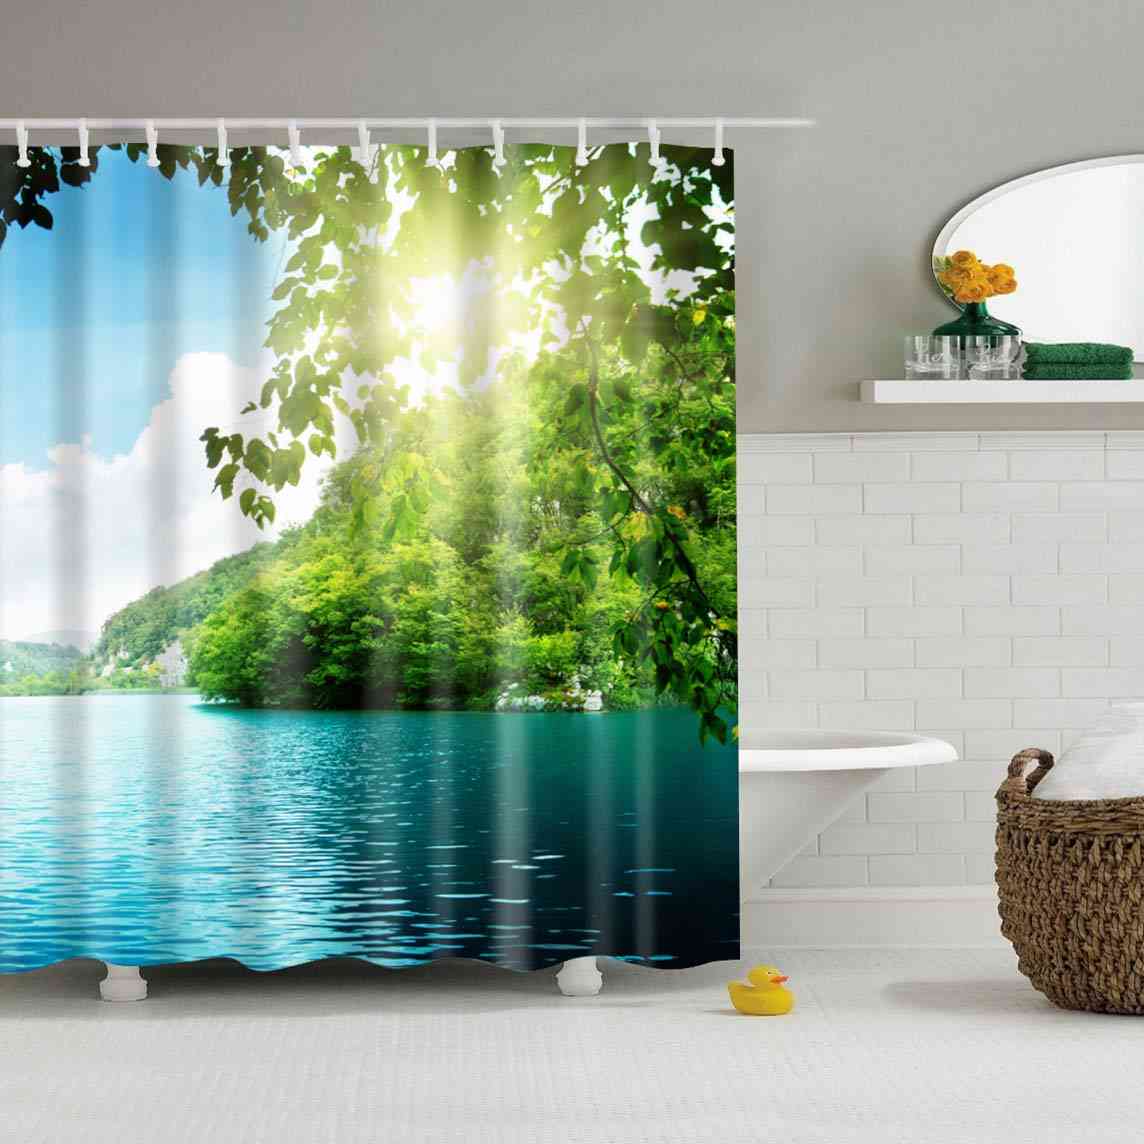 Waterproof Polyester Fabric 3d Forest Style Bath Curtain For Bathroom